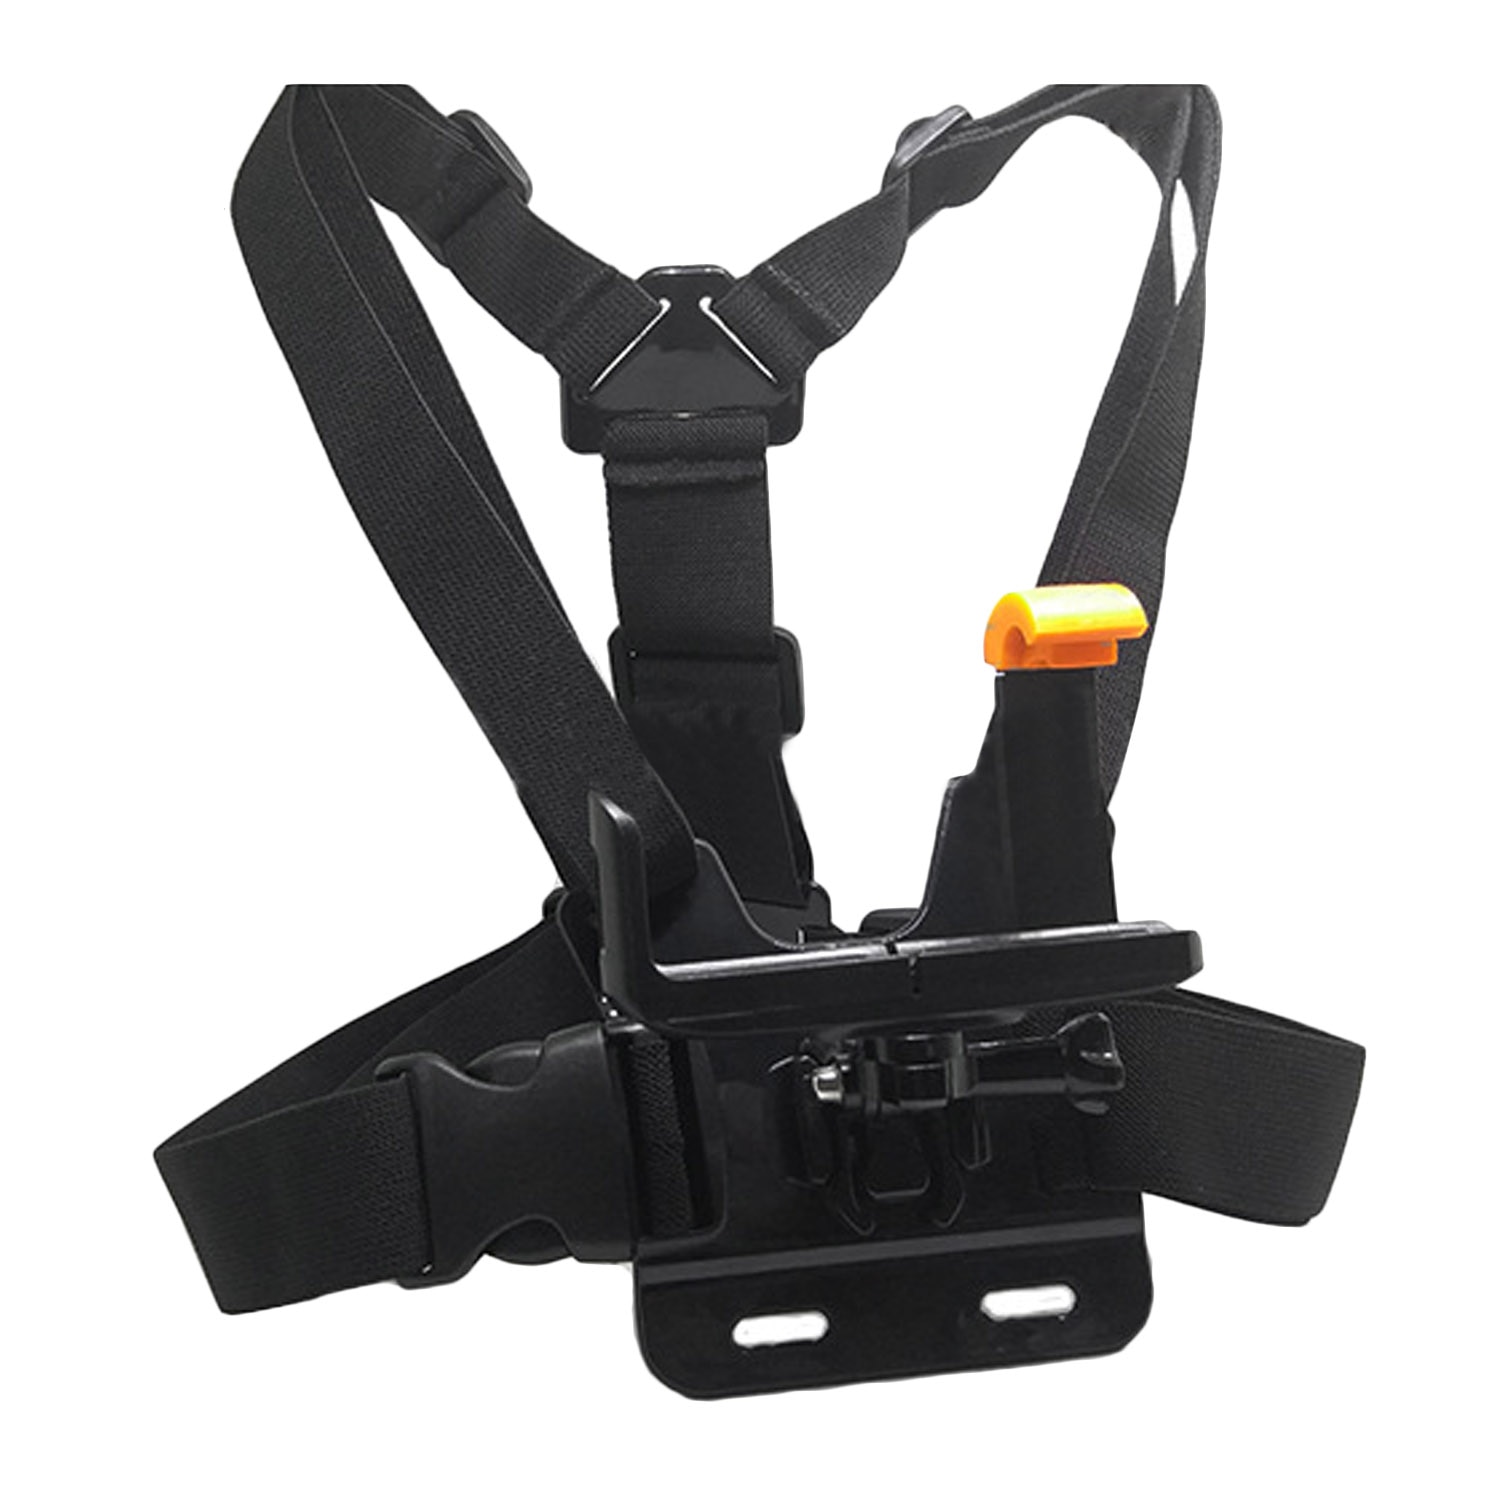 Gosear Adjustable Chest Mount Harness Strap w/ Phone Quick Clip Holder for iPhone GoPro Hero 6 4 3+ SJCAM YI Camera Accessory